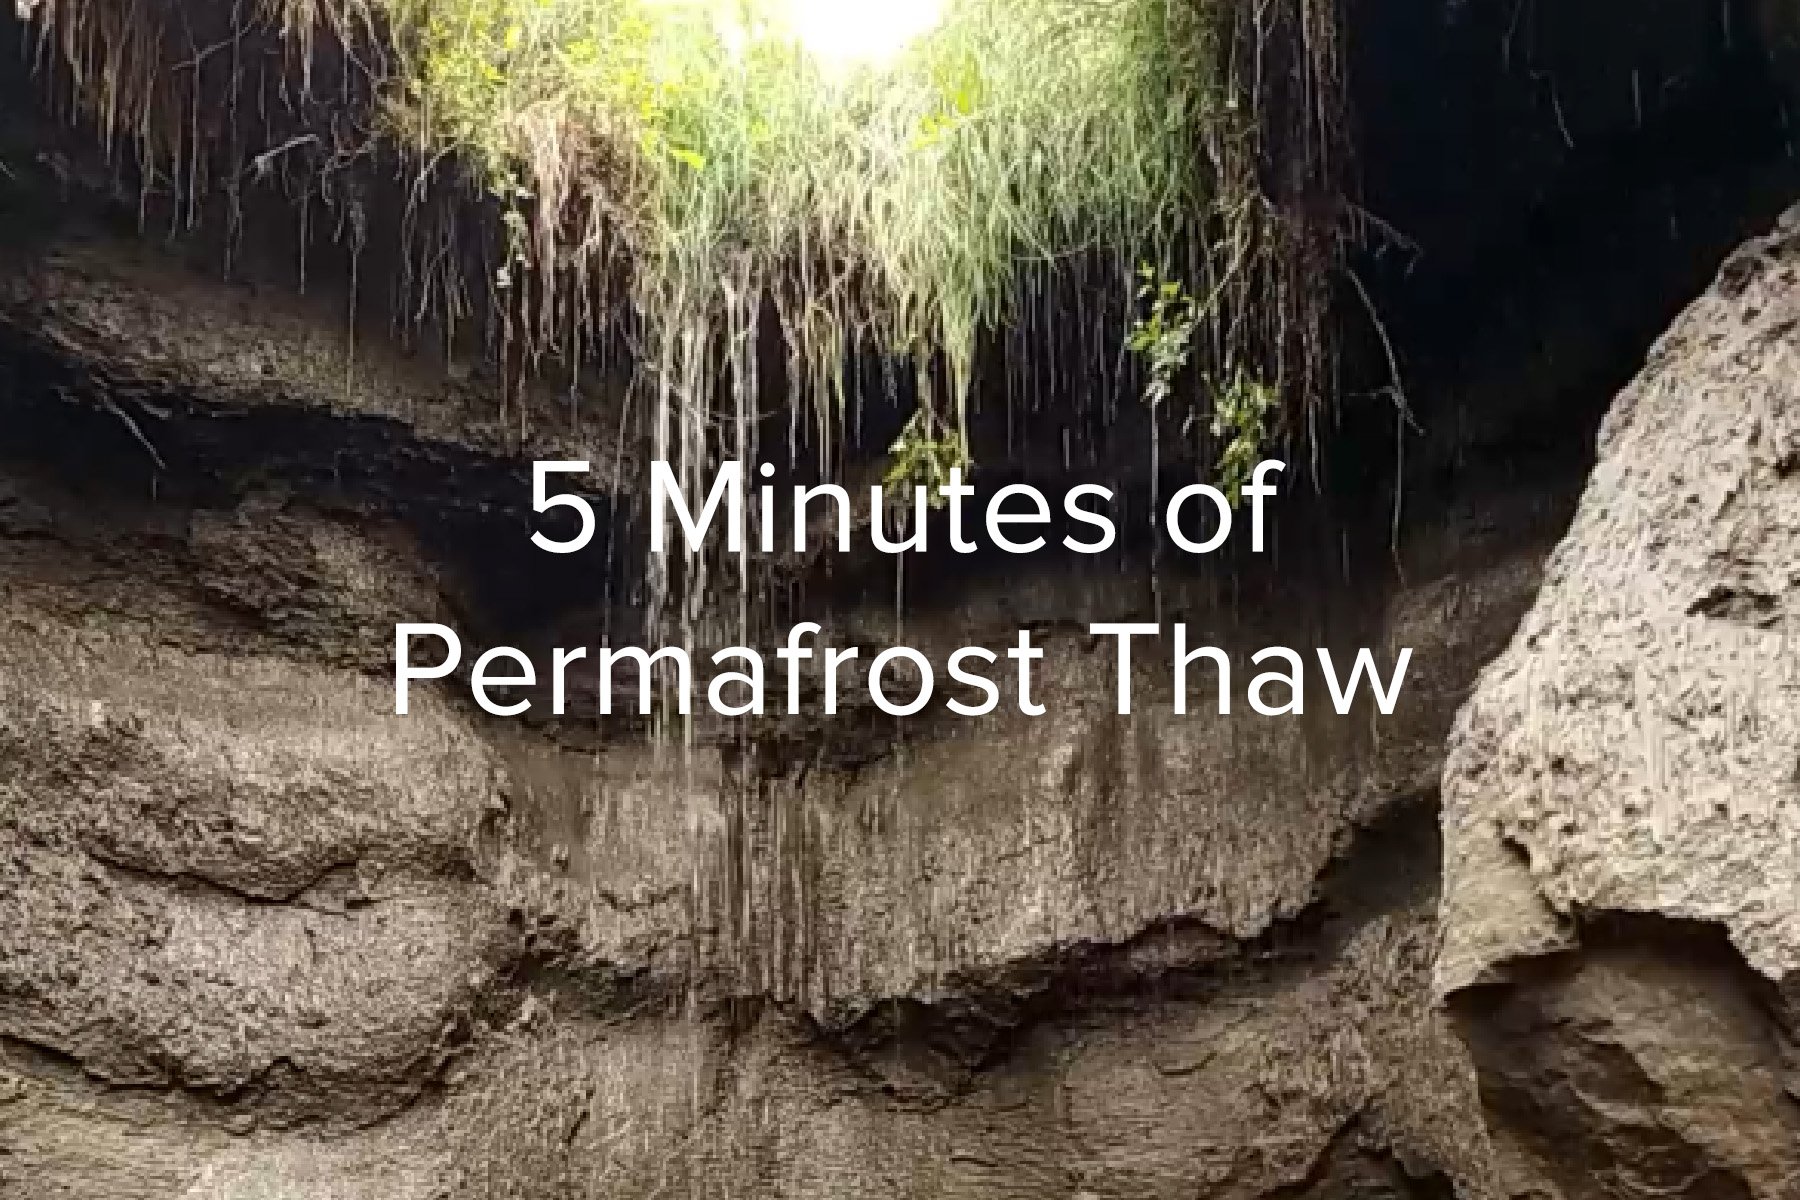 5 Minutes of Permafrost Thaw